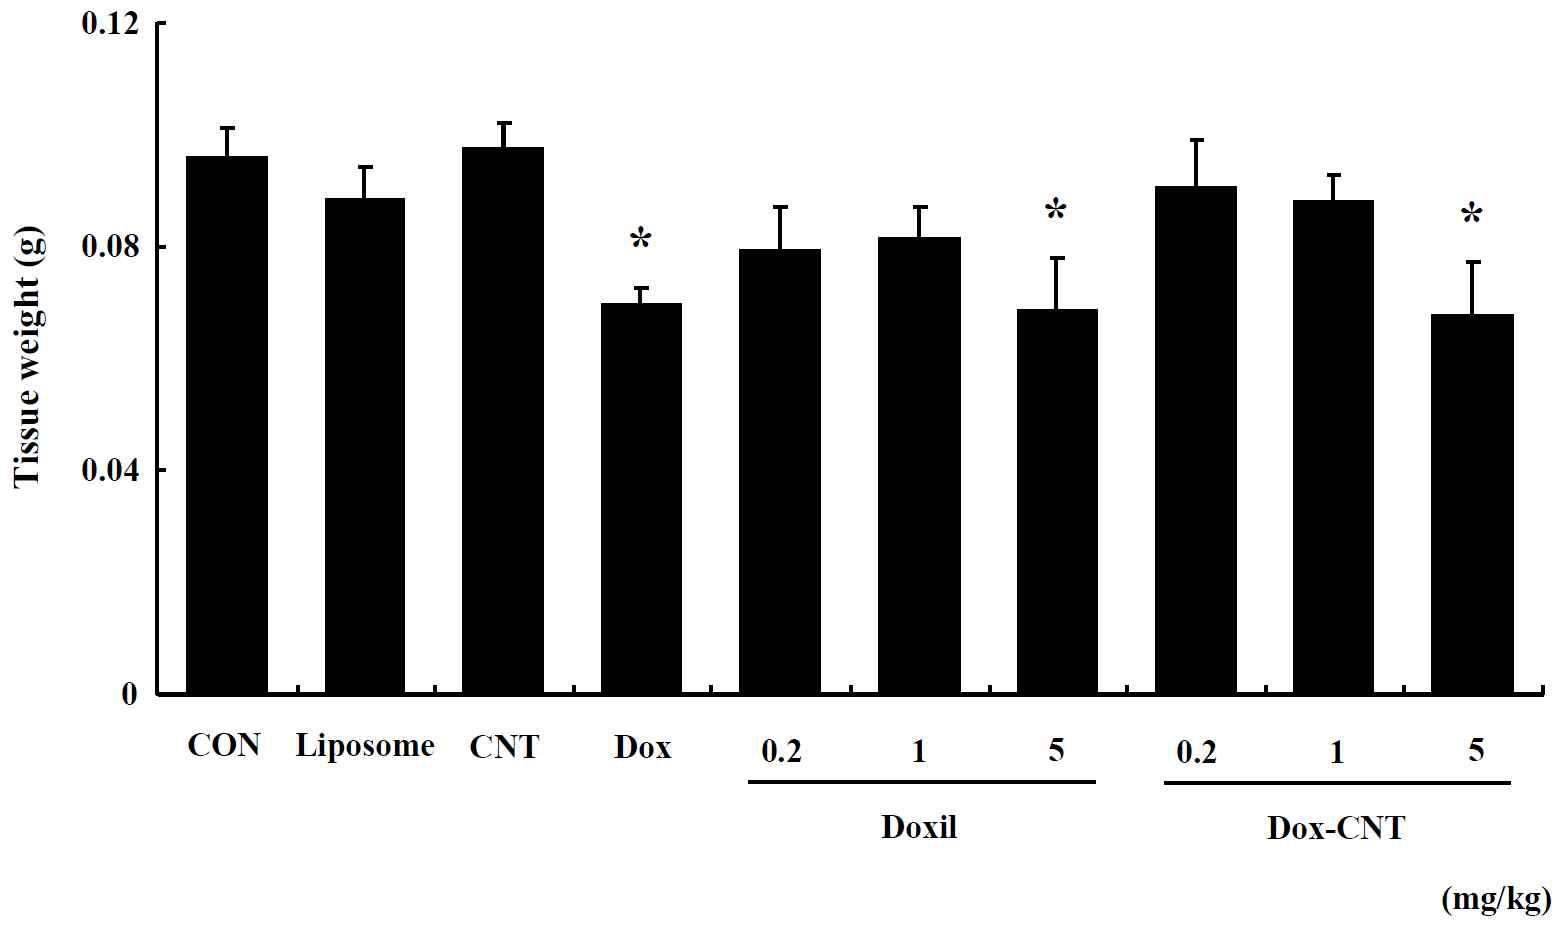 The change of thymus weight in single exposed female ICR mice for 14 days. Mice were respectively administered by intravenous injection with liposome, CNT, Dox, Doxil (0.2, 1, 5 mg/kg) and Dox-CNT (0.2, 1, 5 mg/kg). The results are presented as mean ± SE (n = 10). * p < 0.05, significantly different from the control.